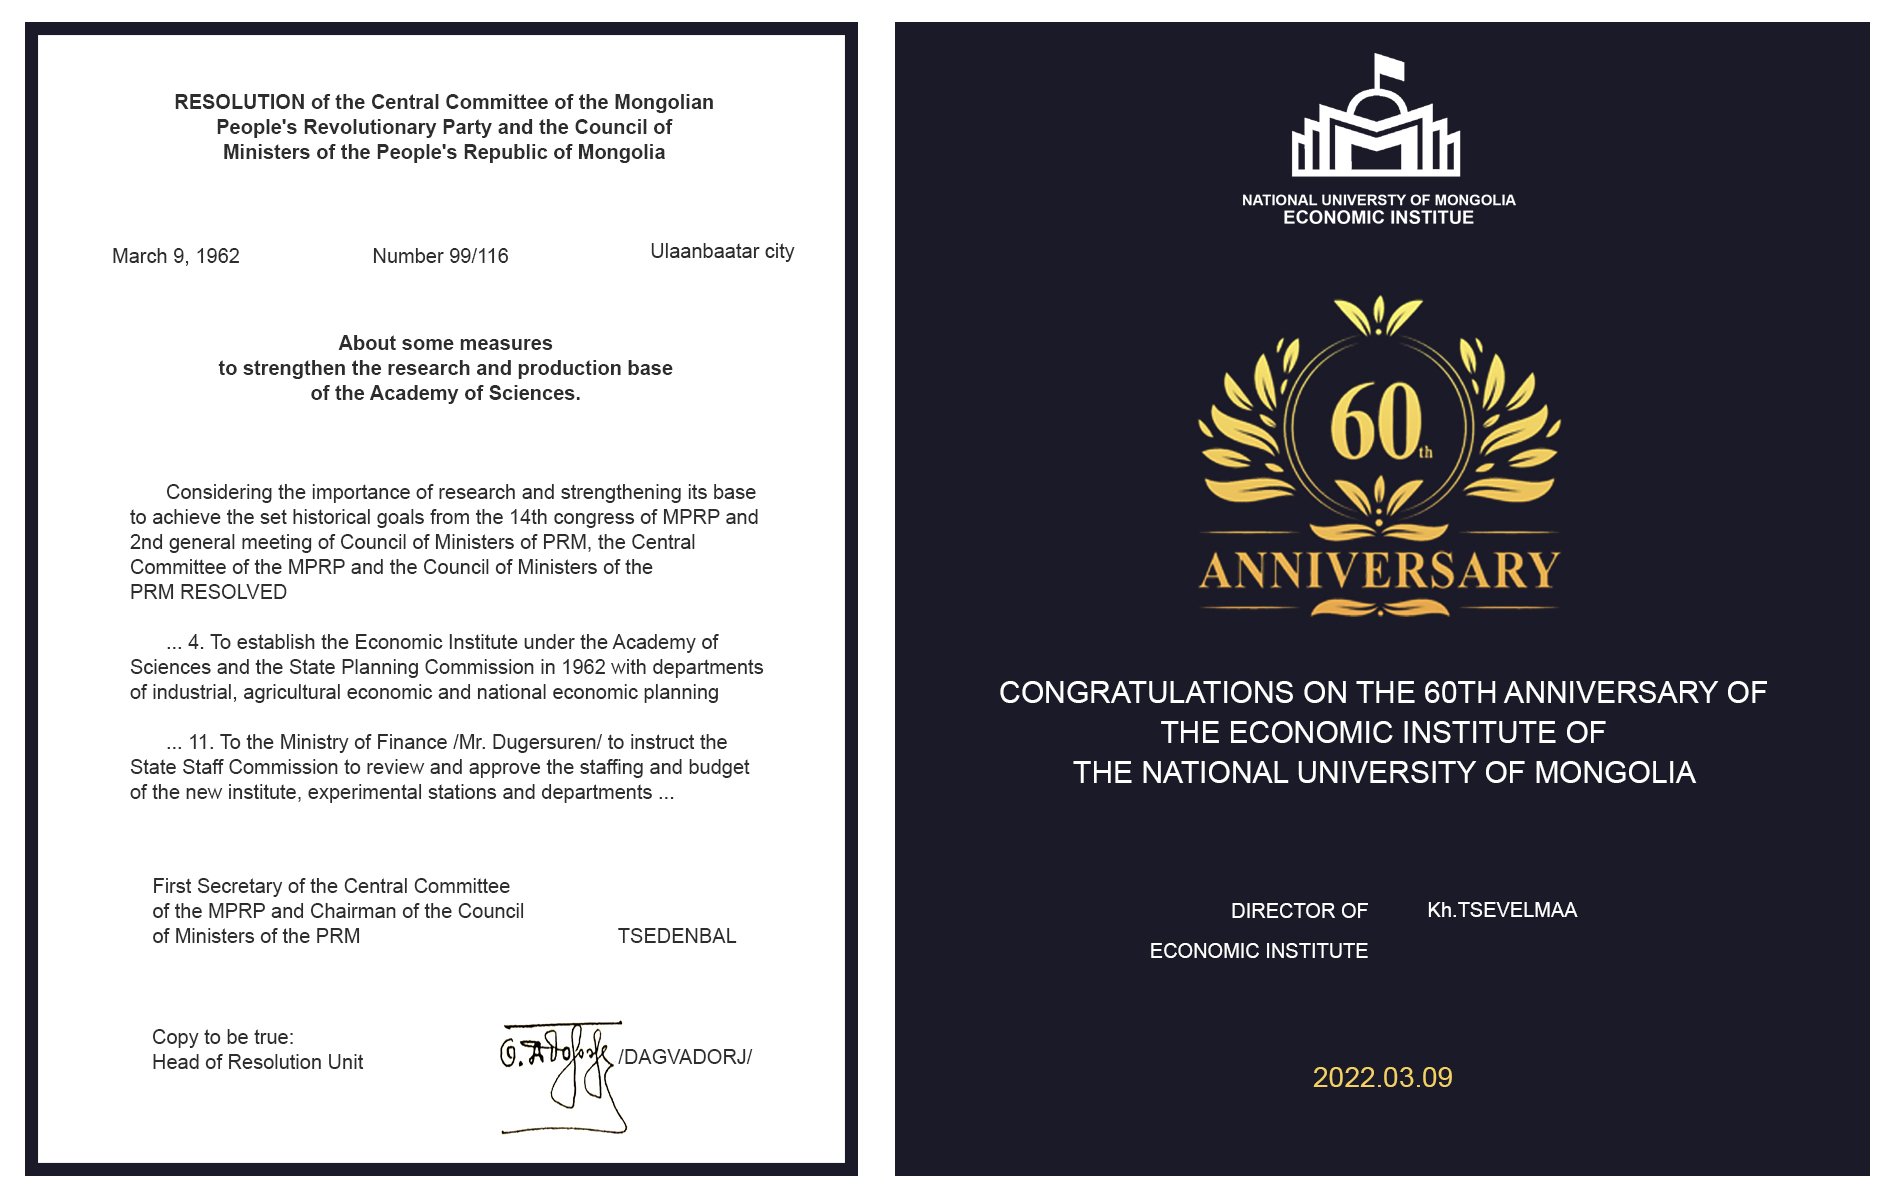 Greetings on the 60th anniversary of the Establishment of the Economic Institute